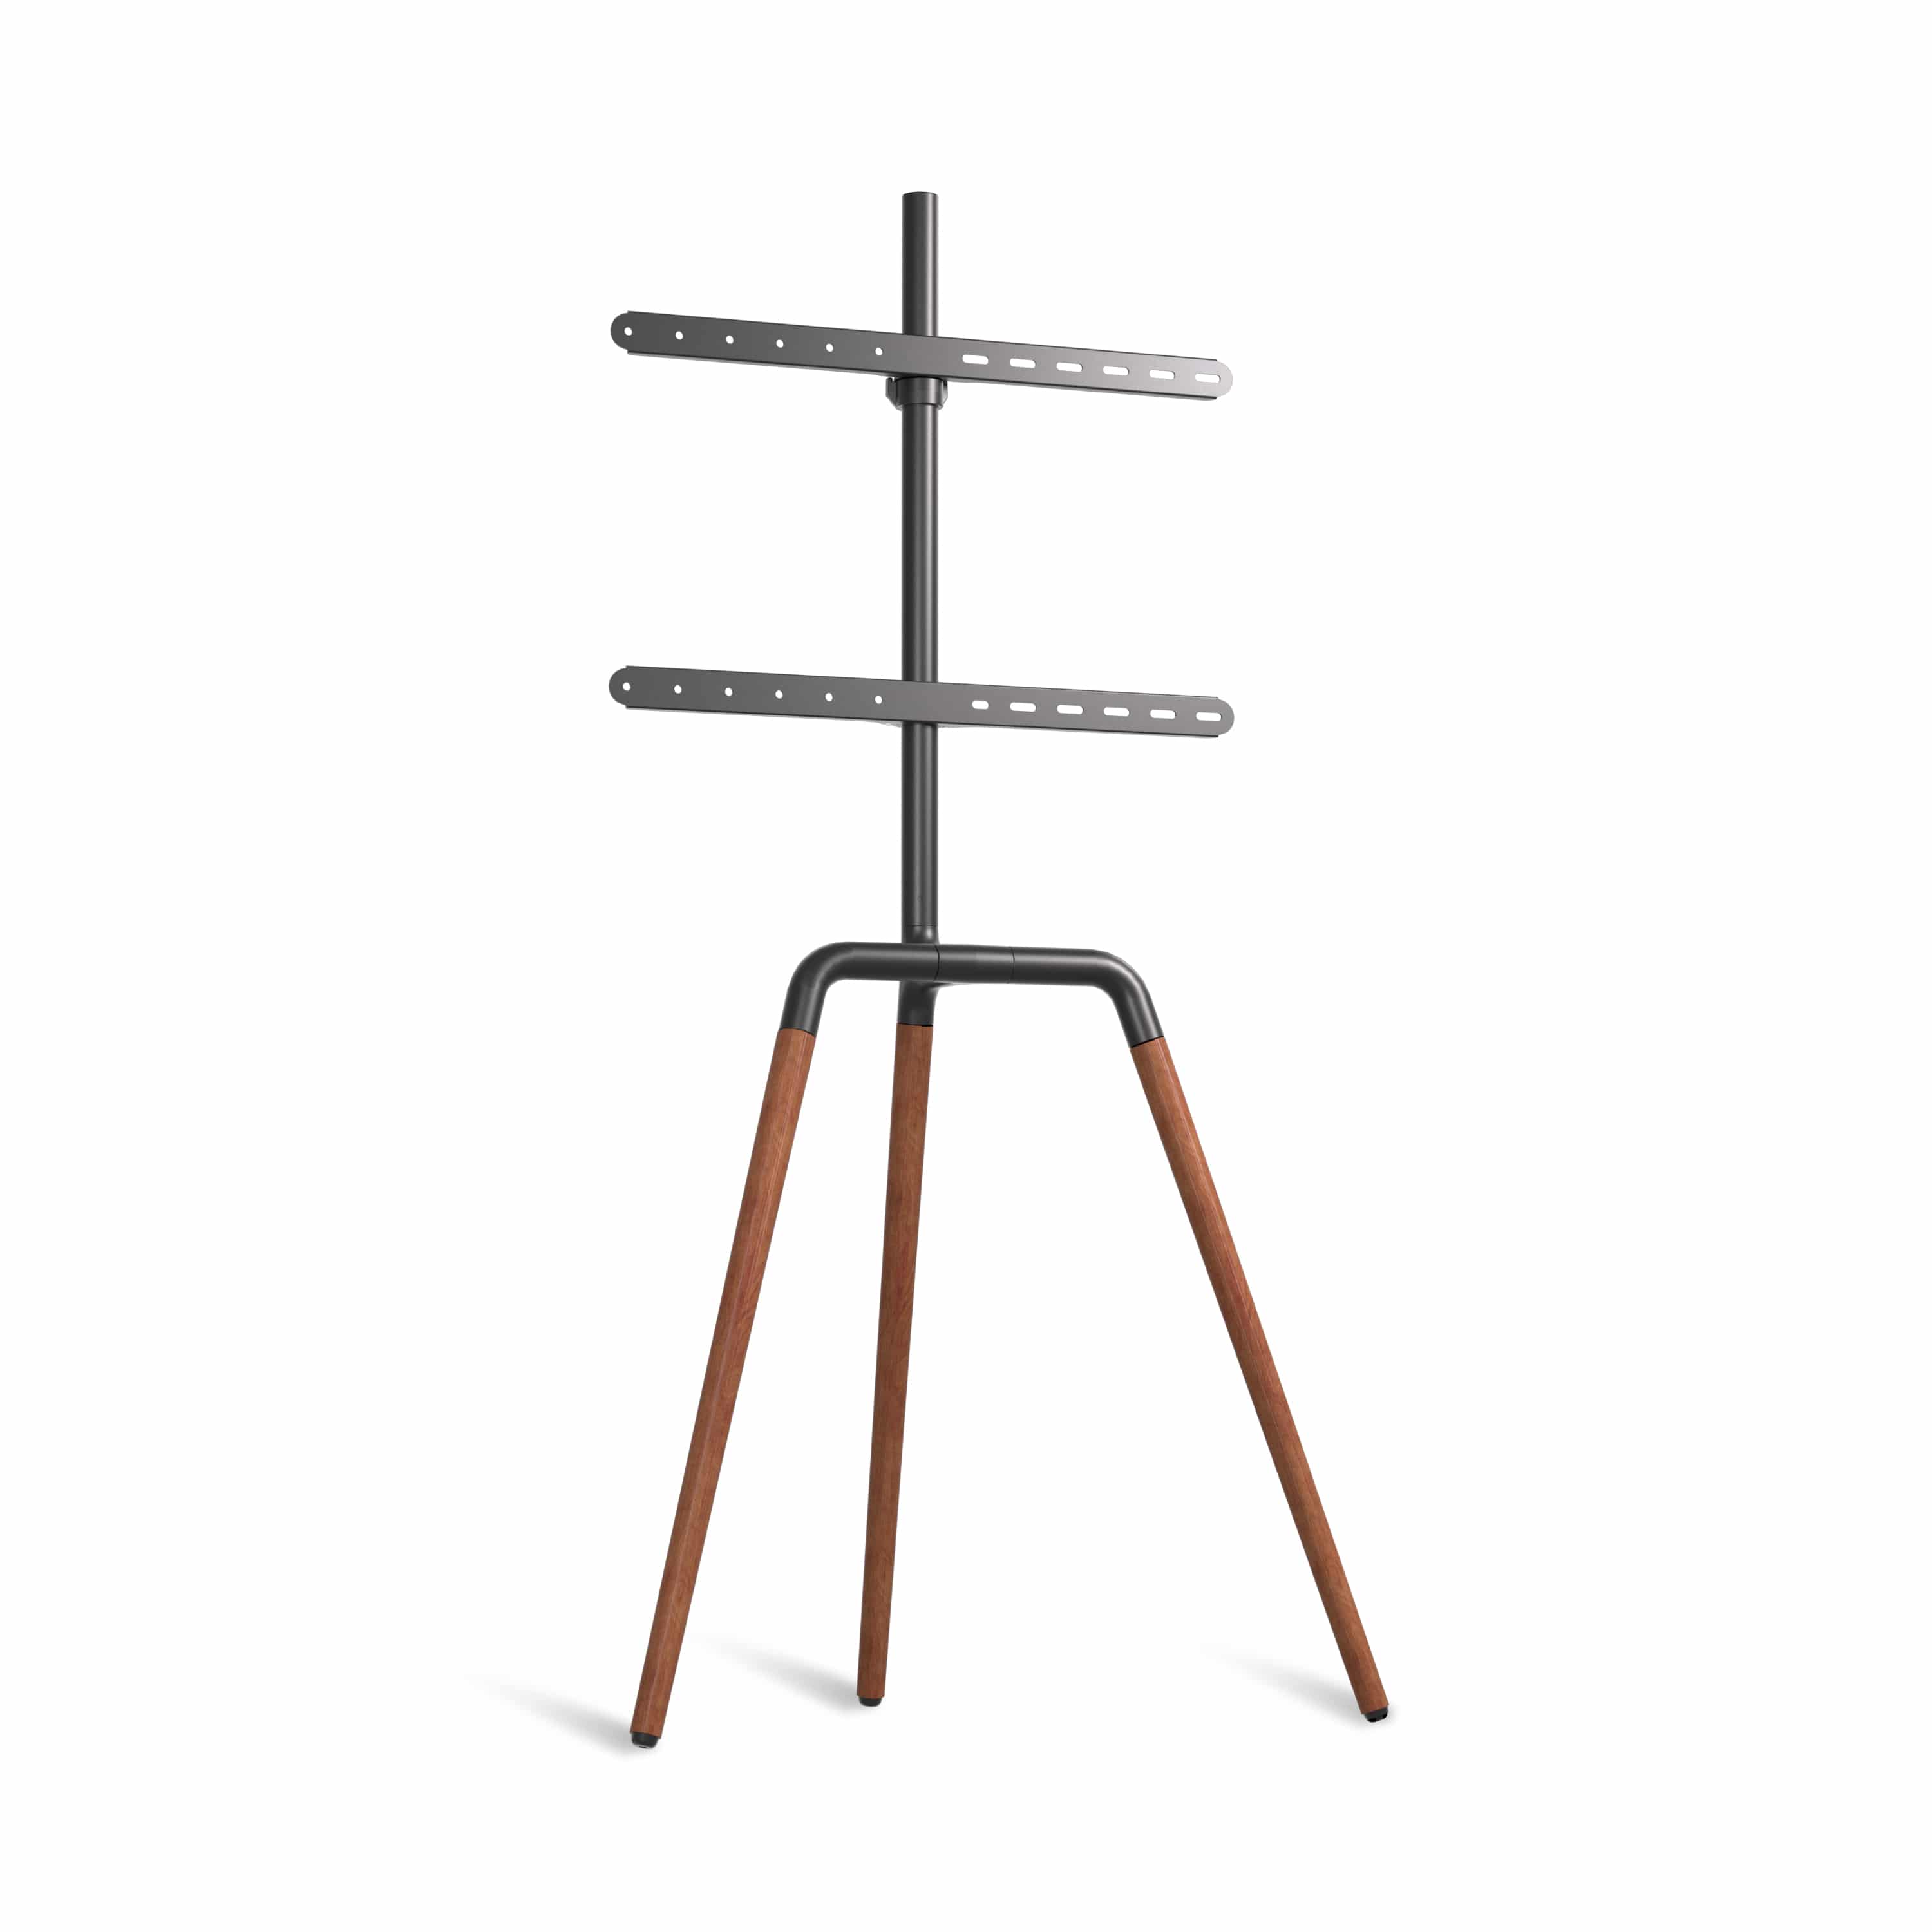 promounts-modern-easel-tv-floor-stand-with-180-swivel-and-tripod-base-for-47-72-inches-screens-afmss6404